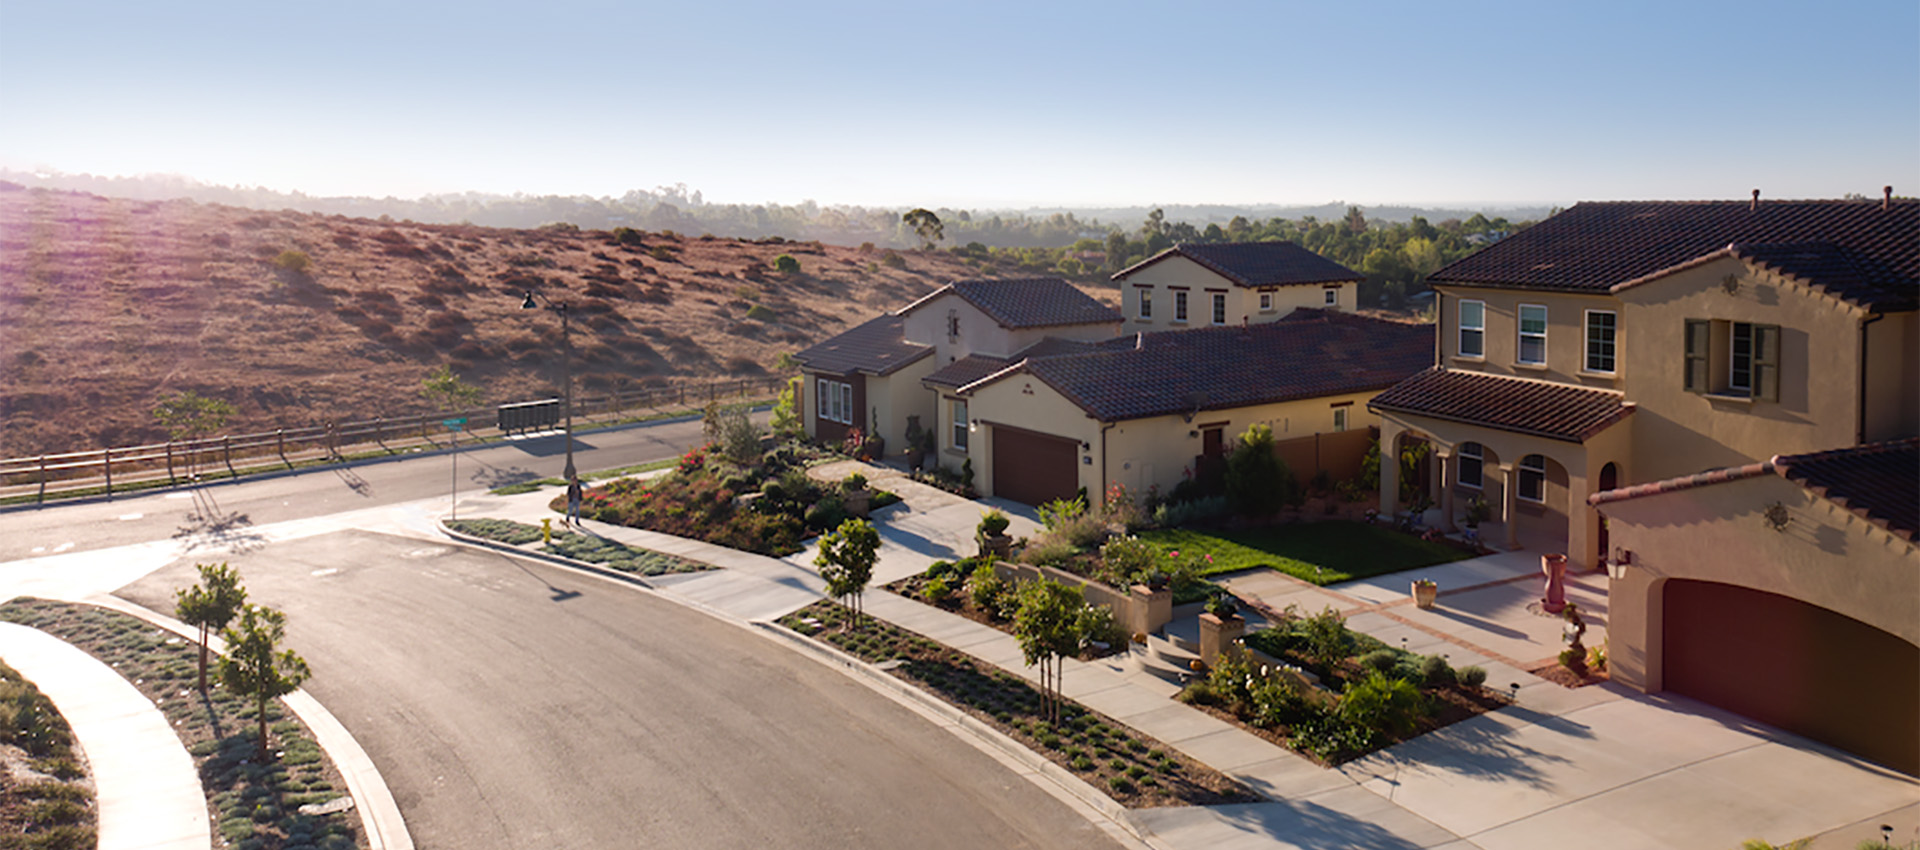 Image of model homes at Southern Preserve